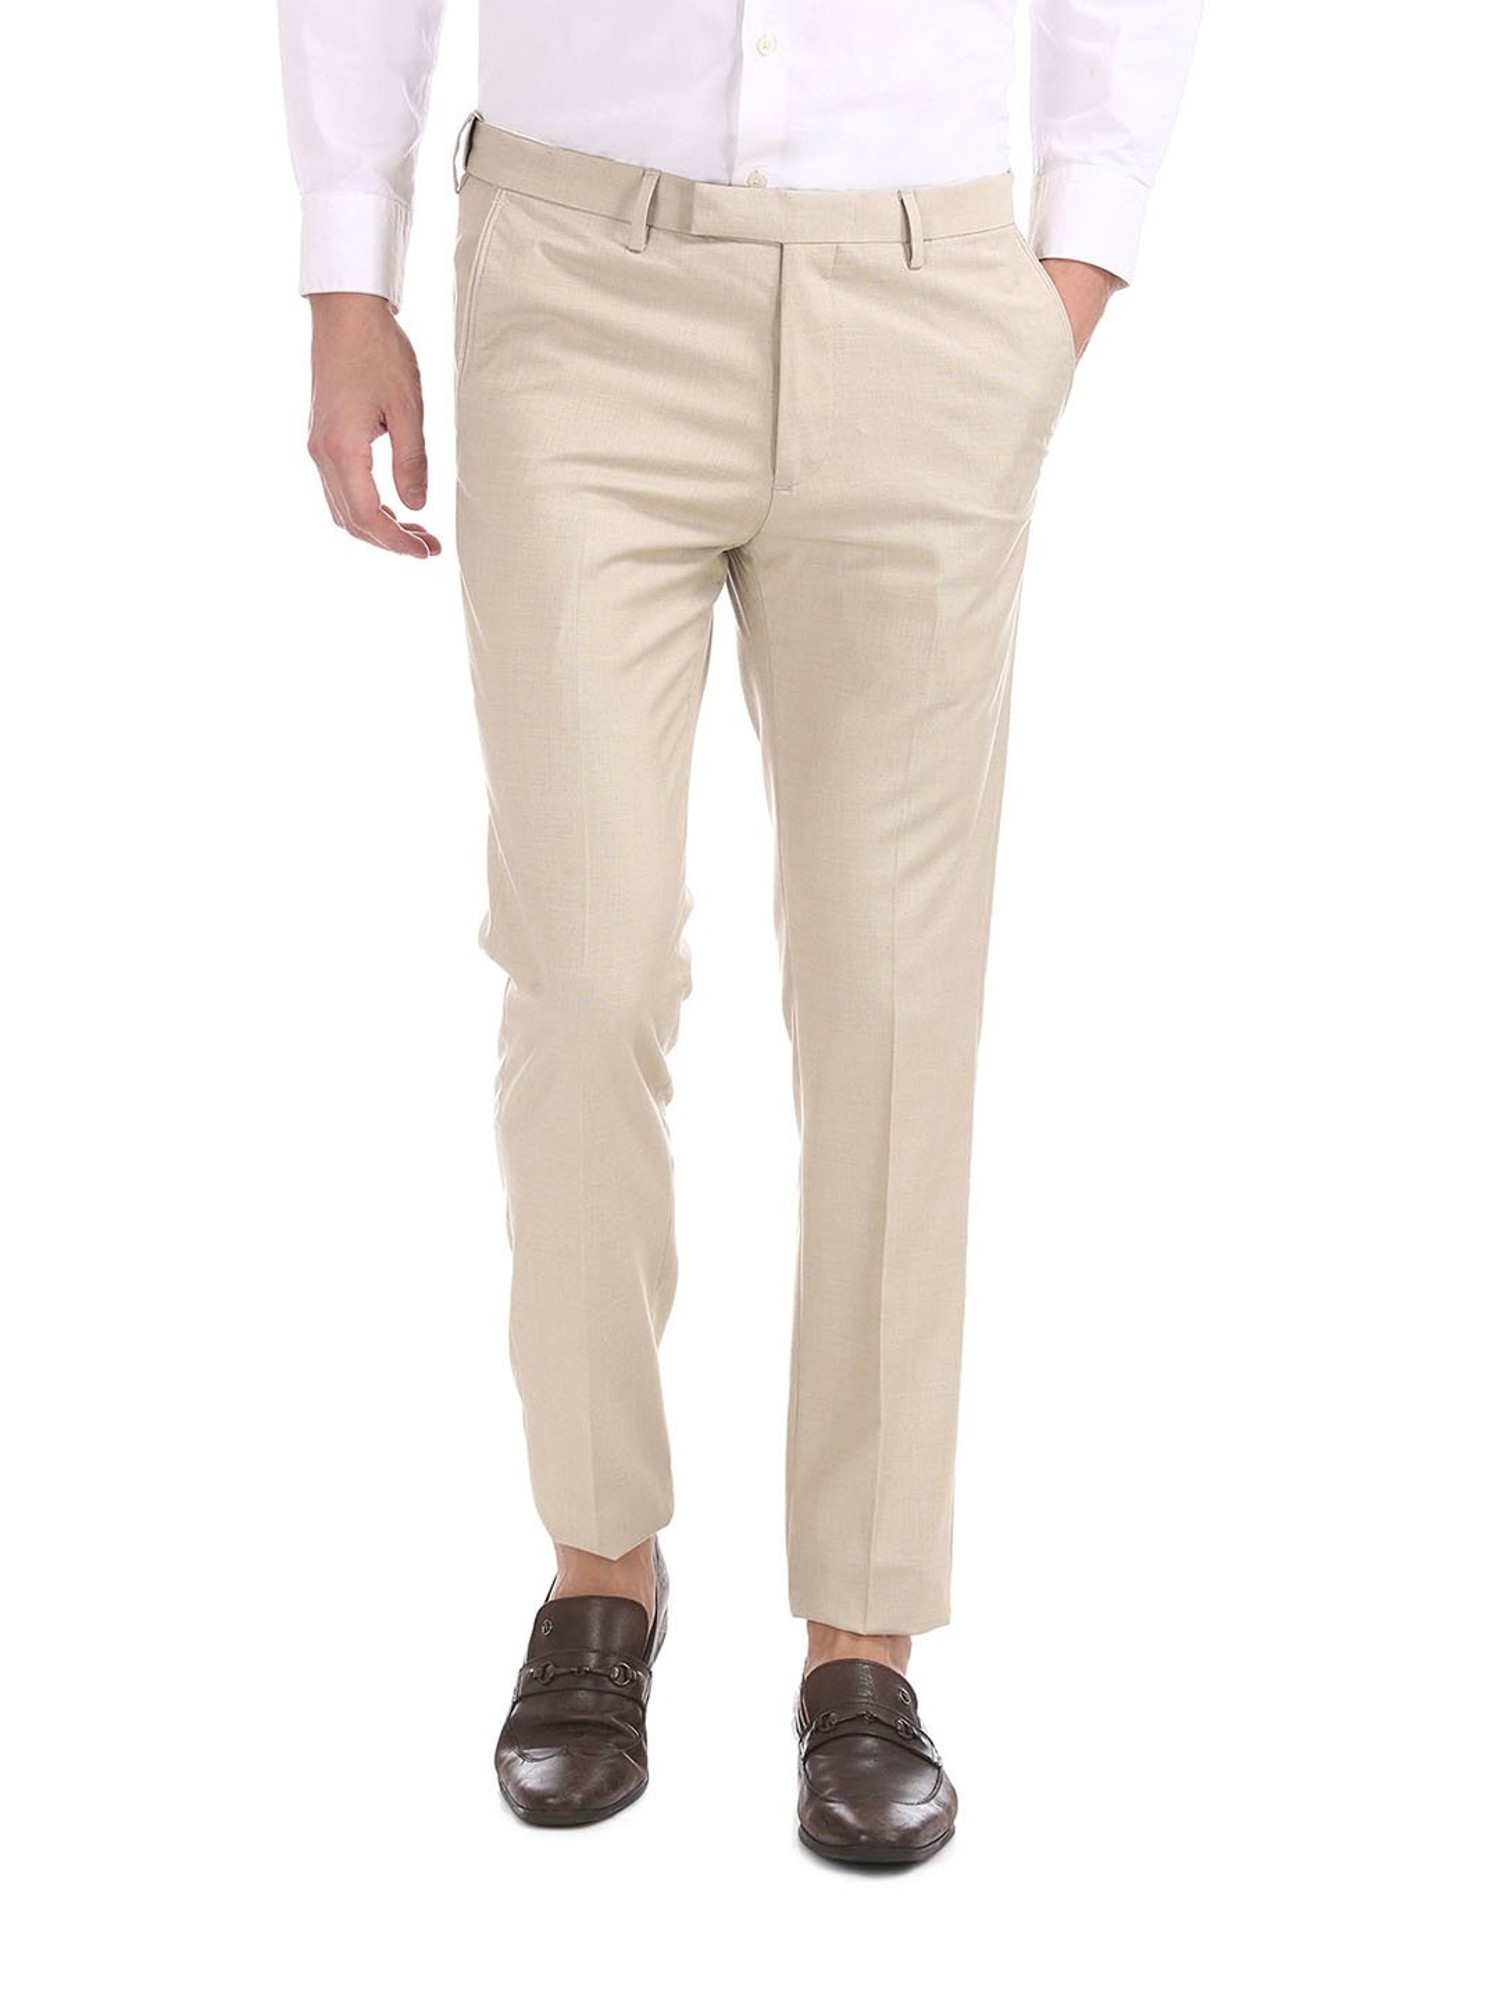 10 Best Cream pants outfit ideas  cream pants cream pants outfit mens  outfits